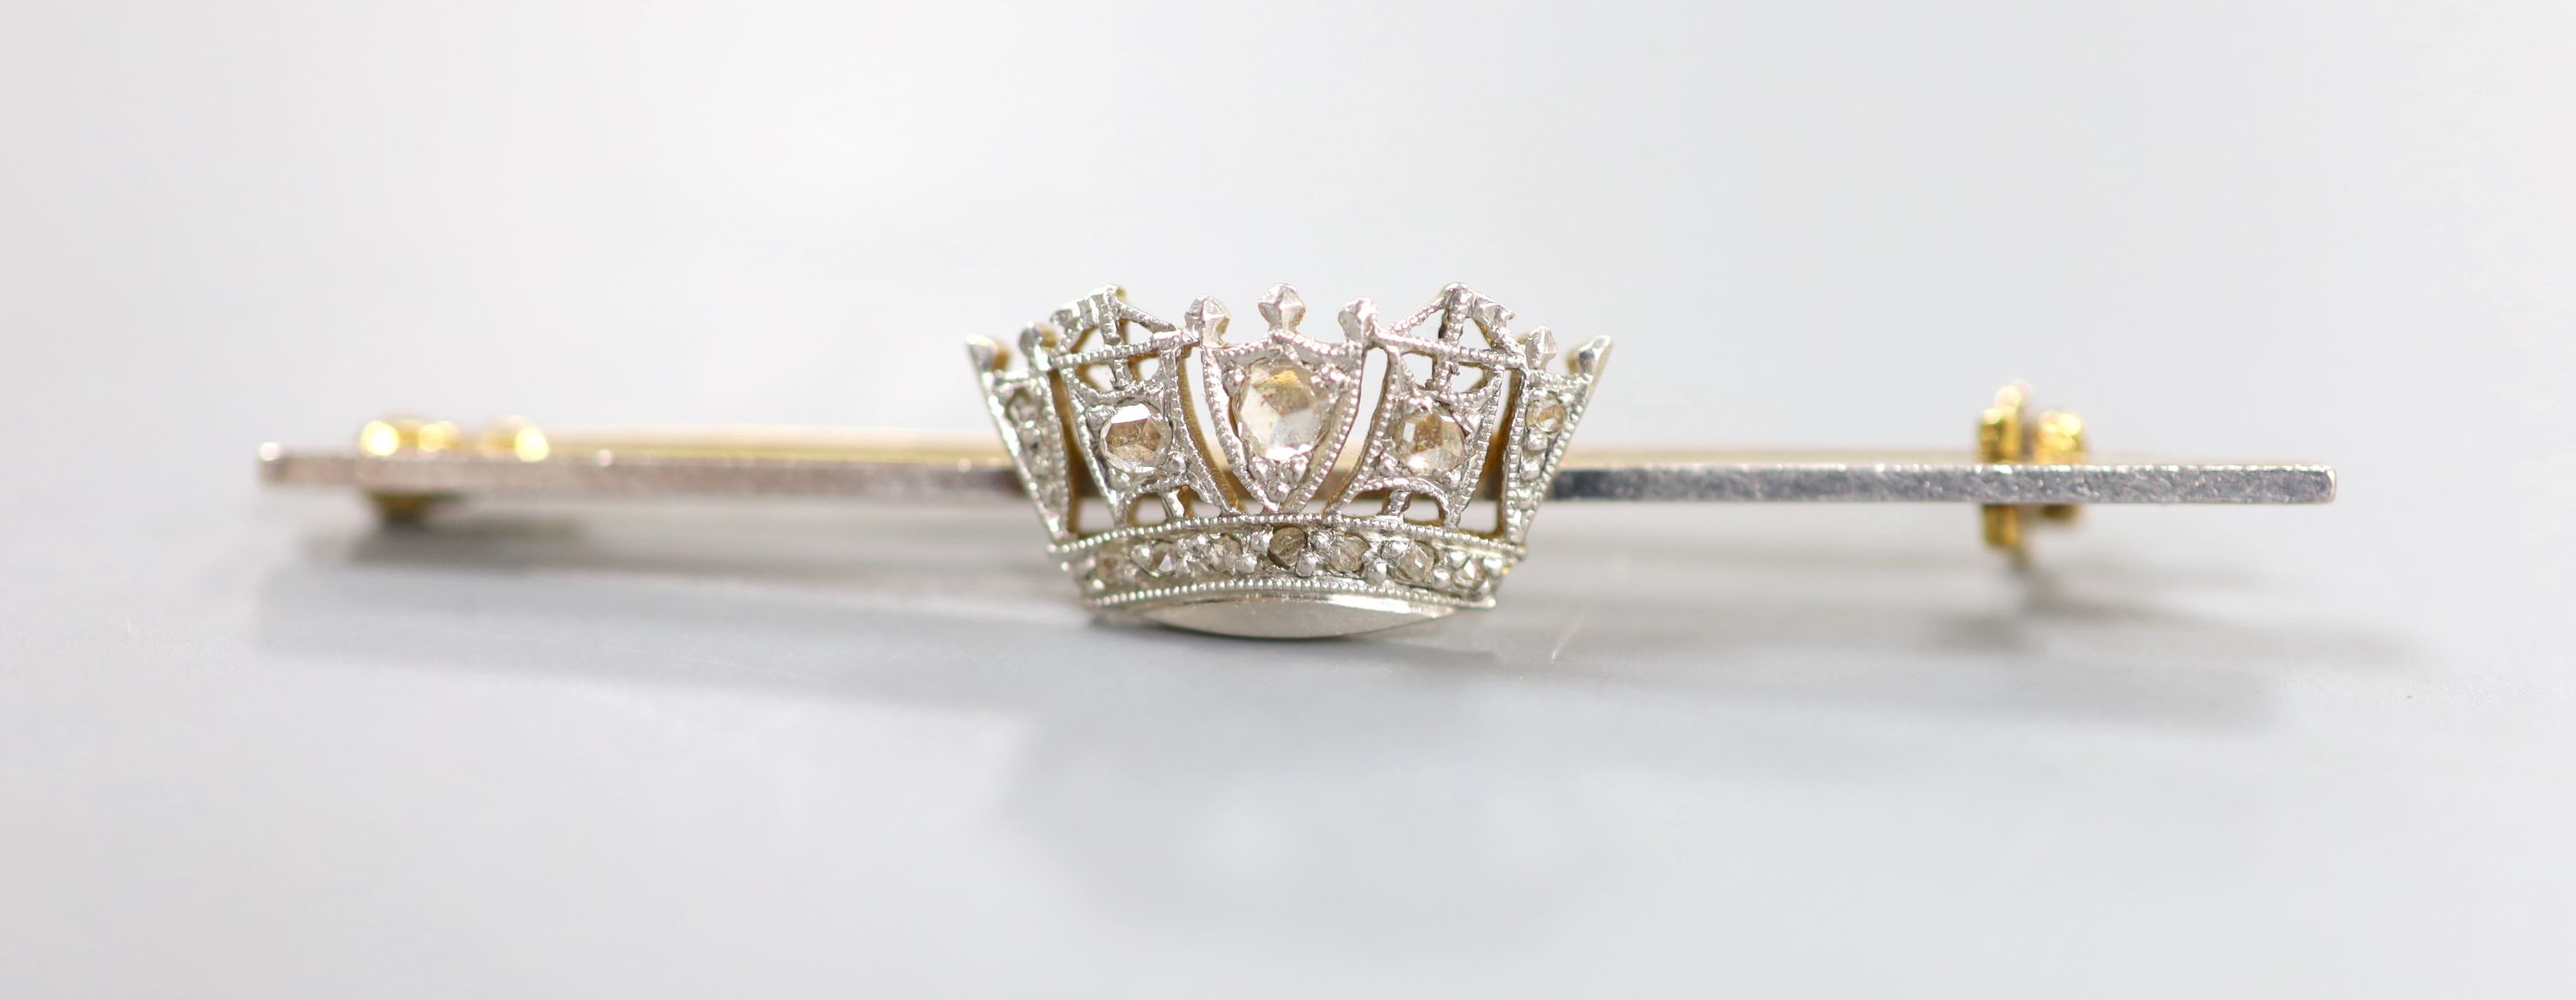 A 15ct yellow and white gold and diamond Royal Naval sweetheart brooch, 49mm, gross 3.5 grams.